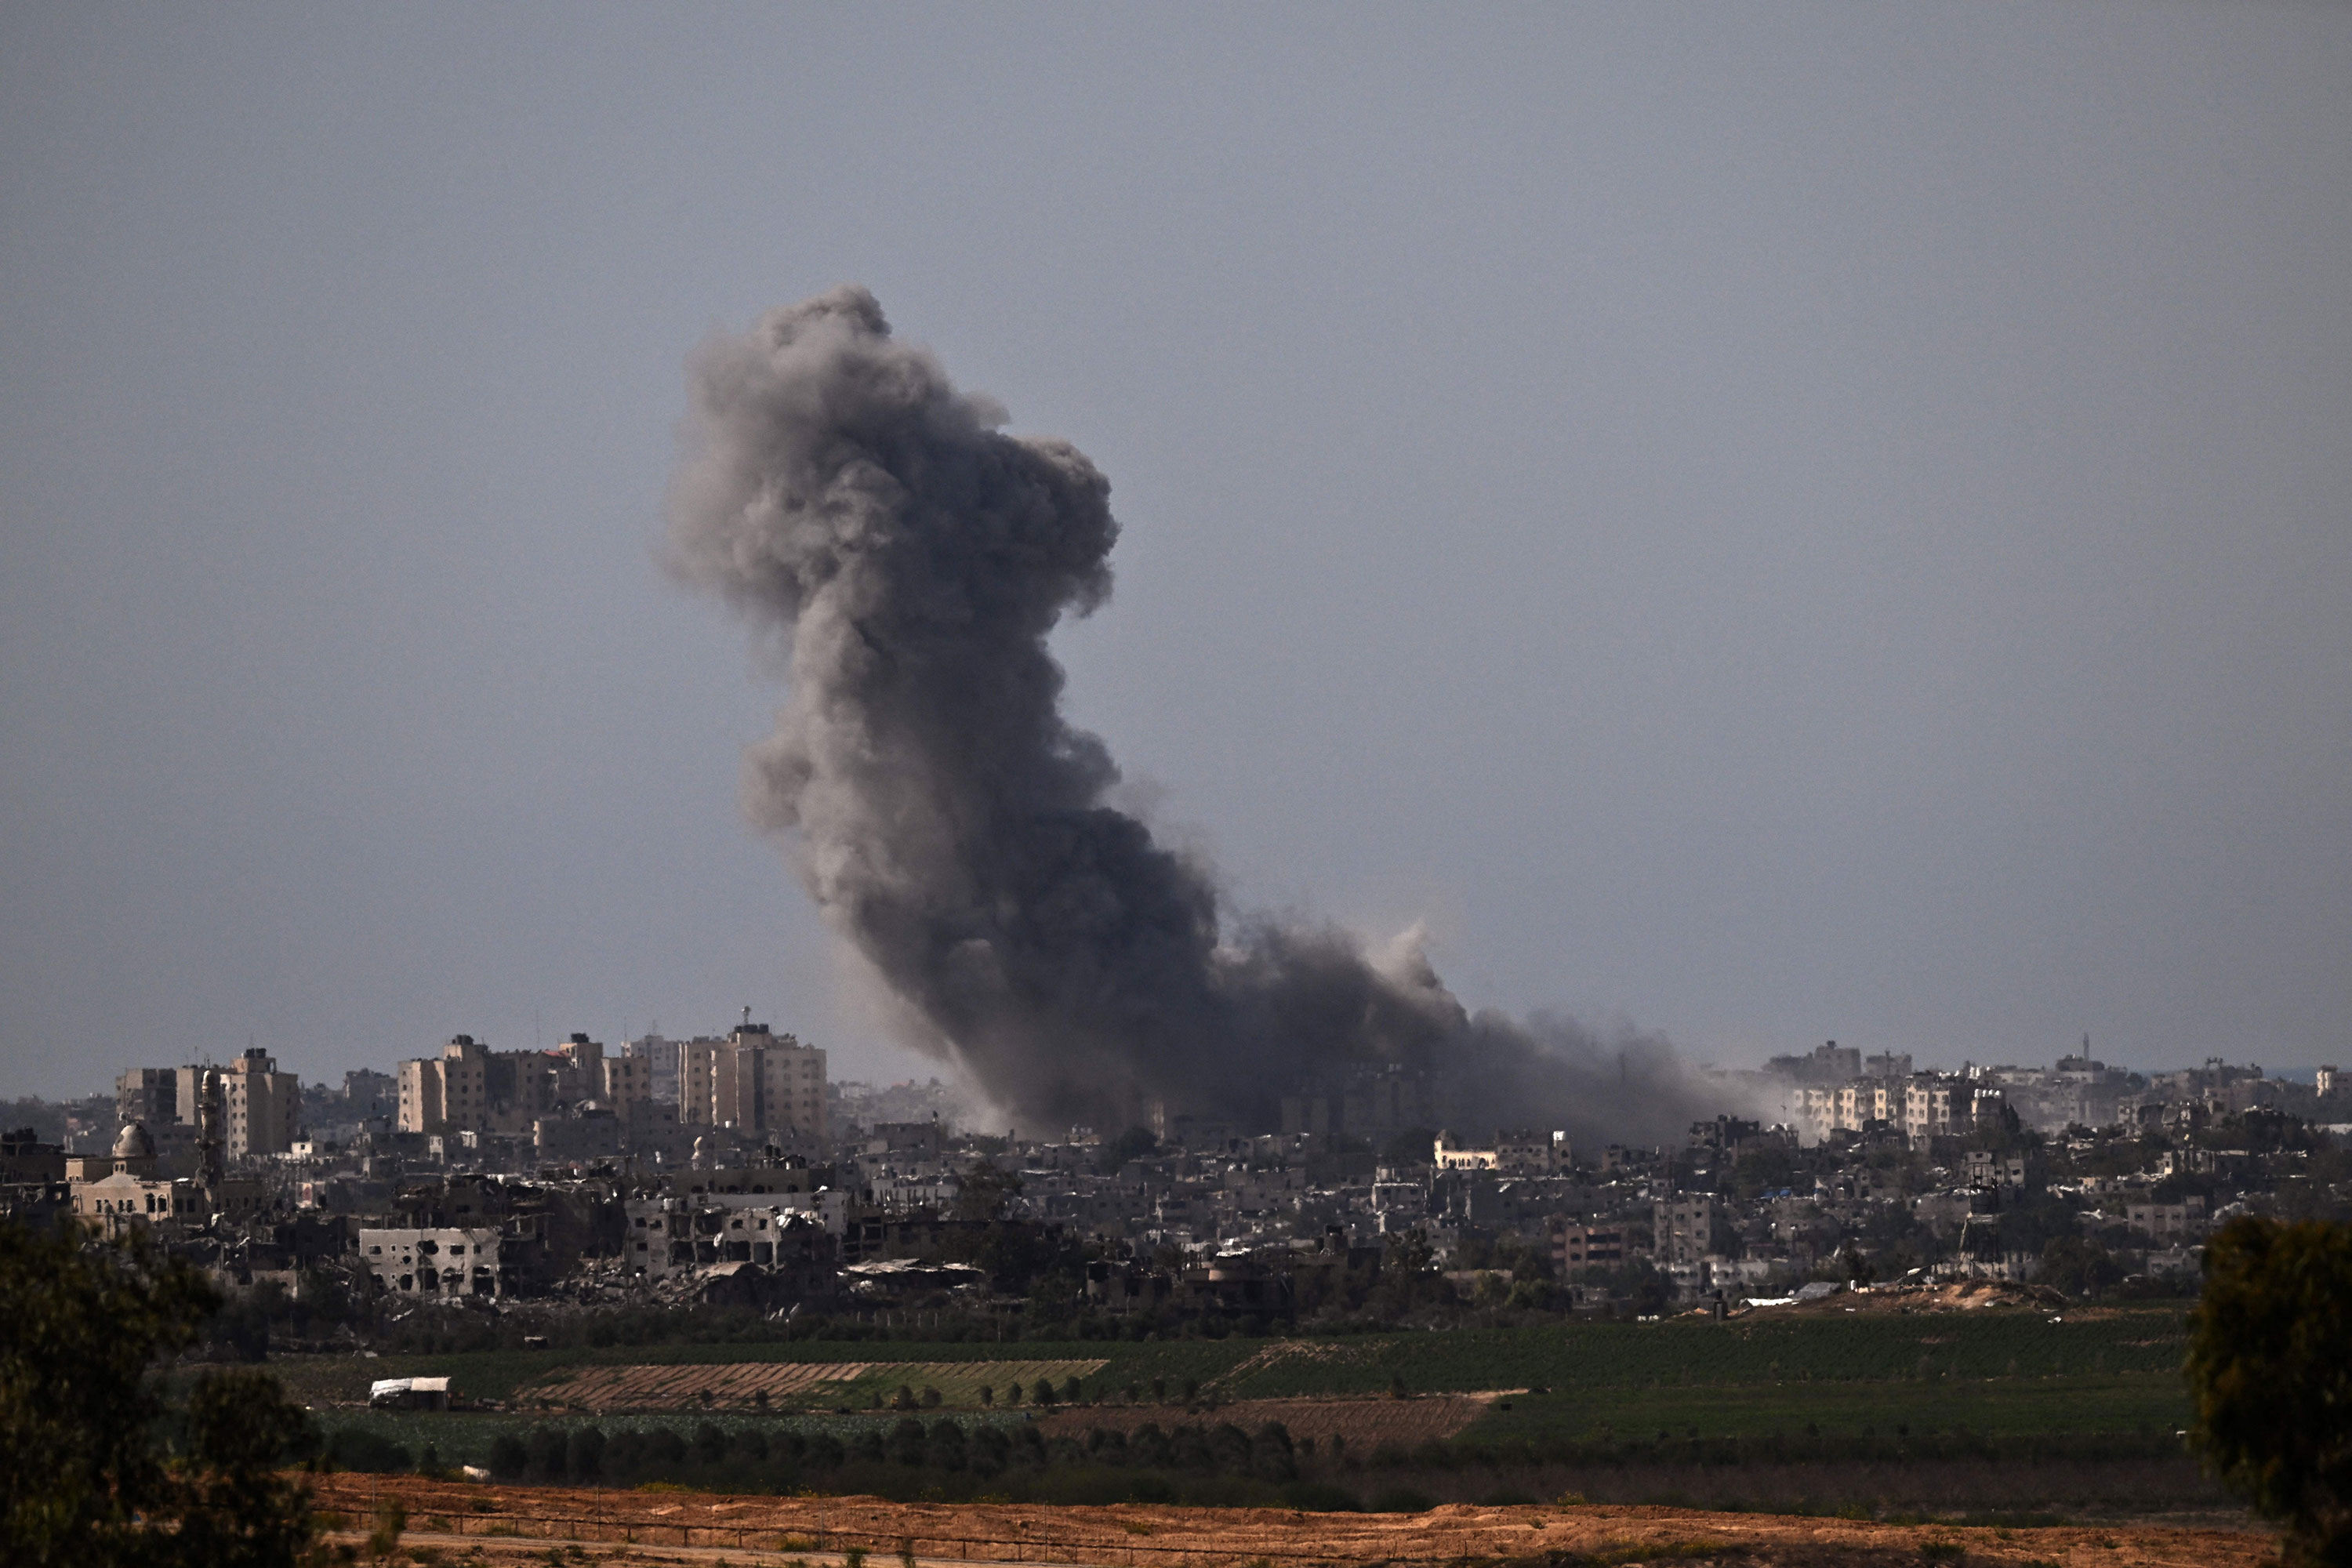 Deaths in Gaza, Israeli response and more